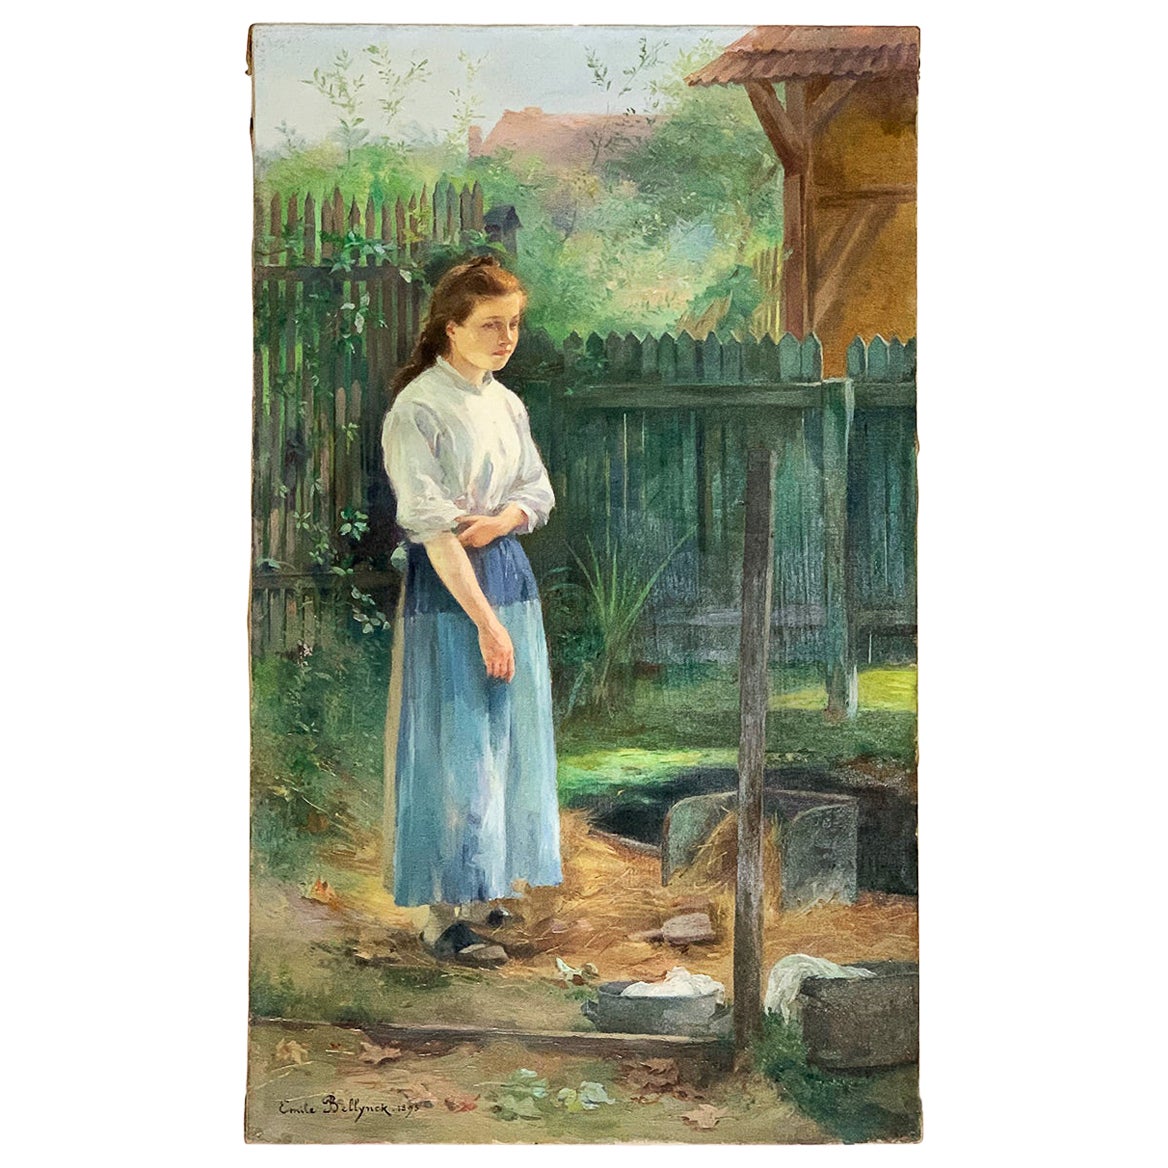 Bellynck Hubert-Emile '1859-1920' "Young girl at the wash house" For Sale